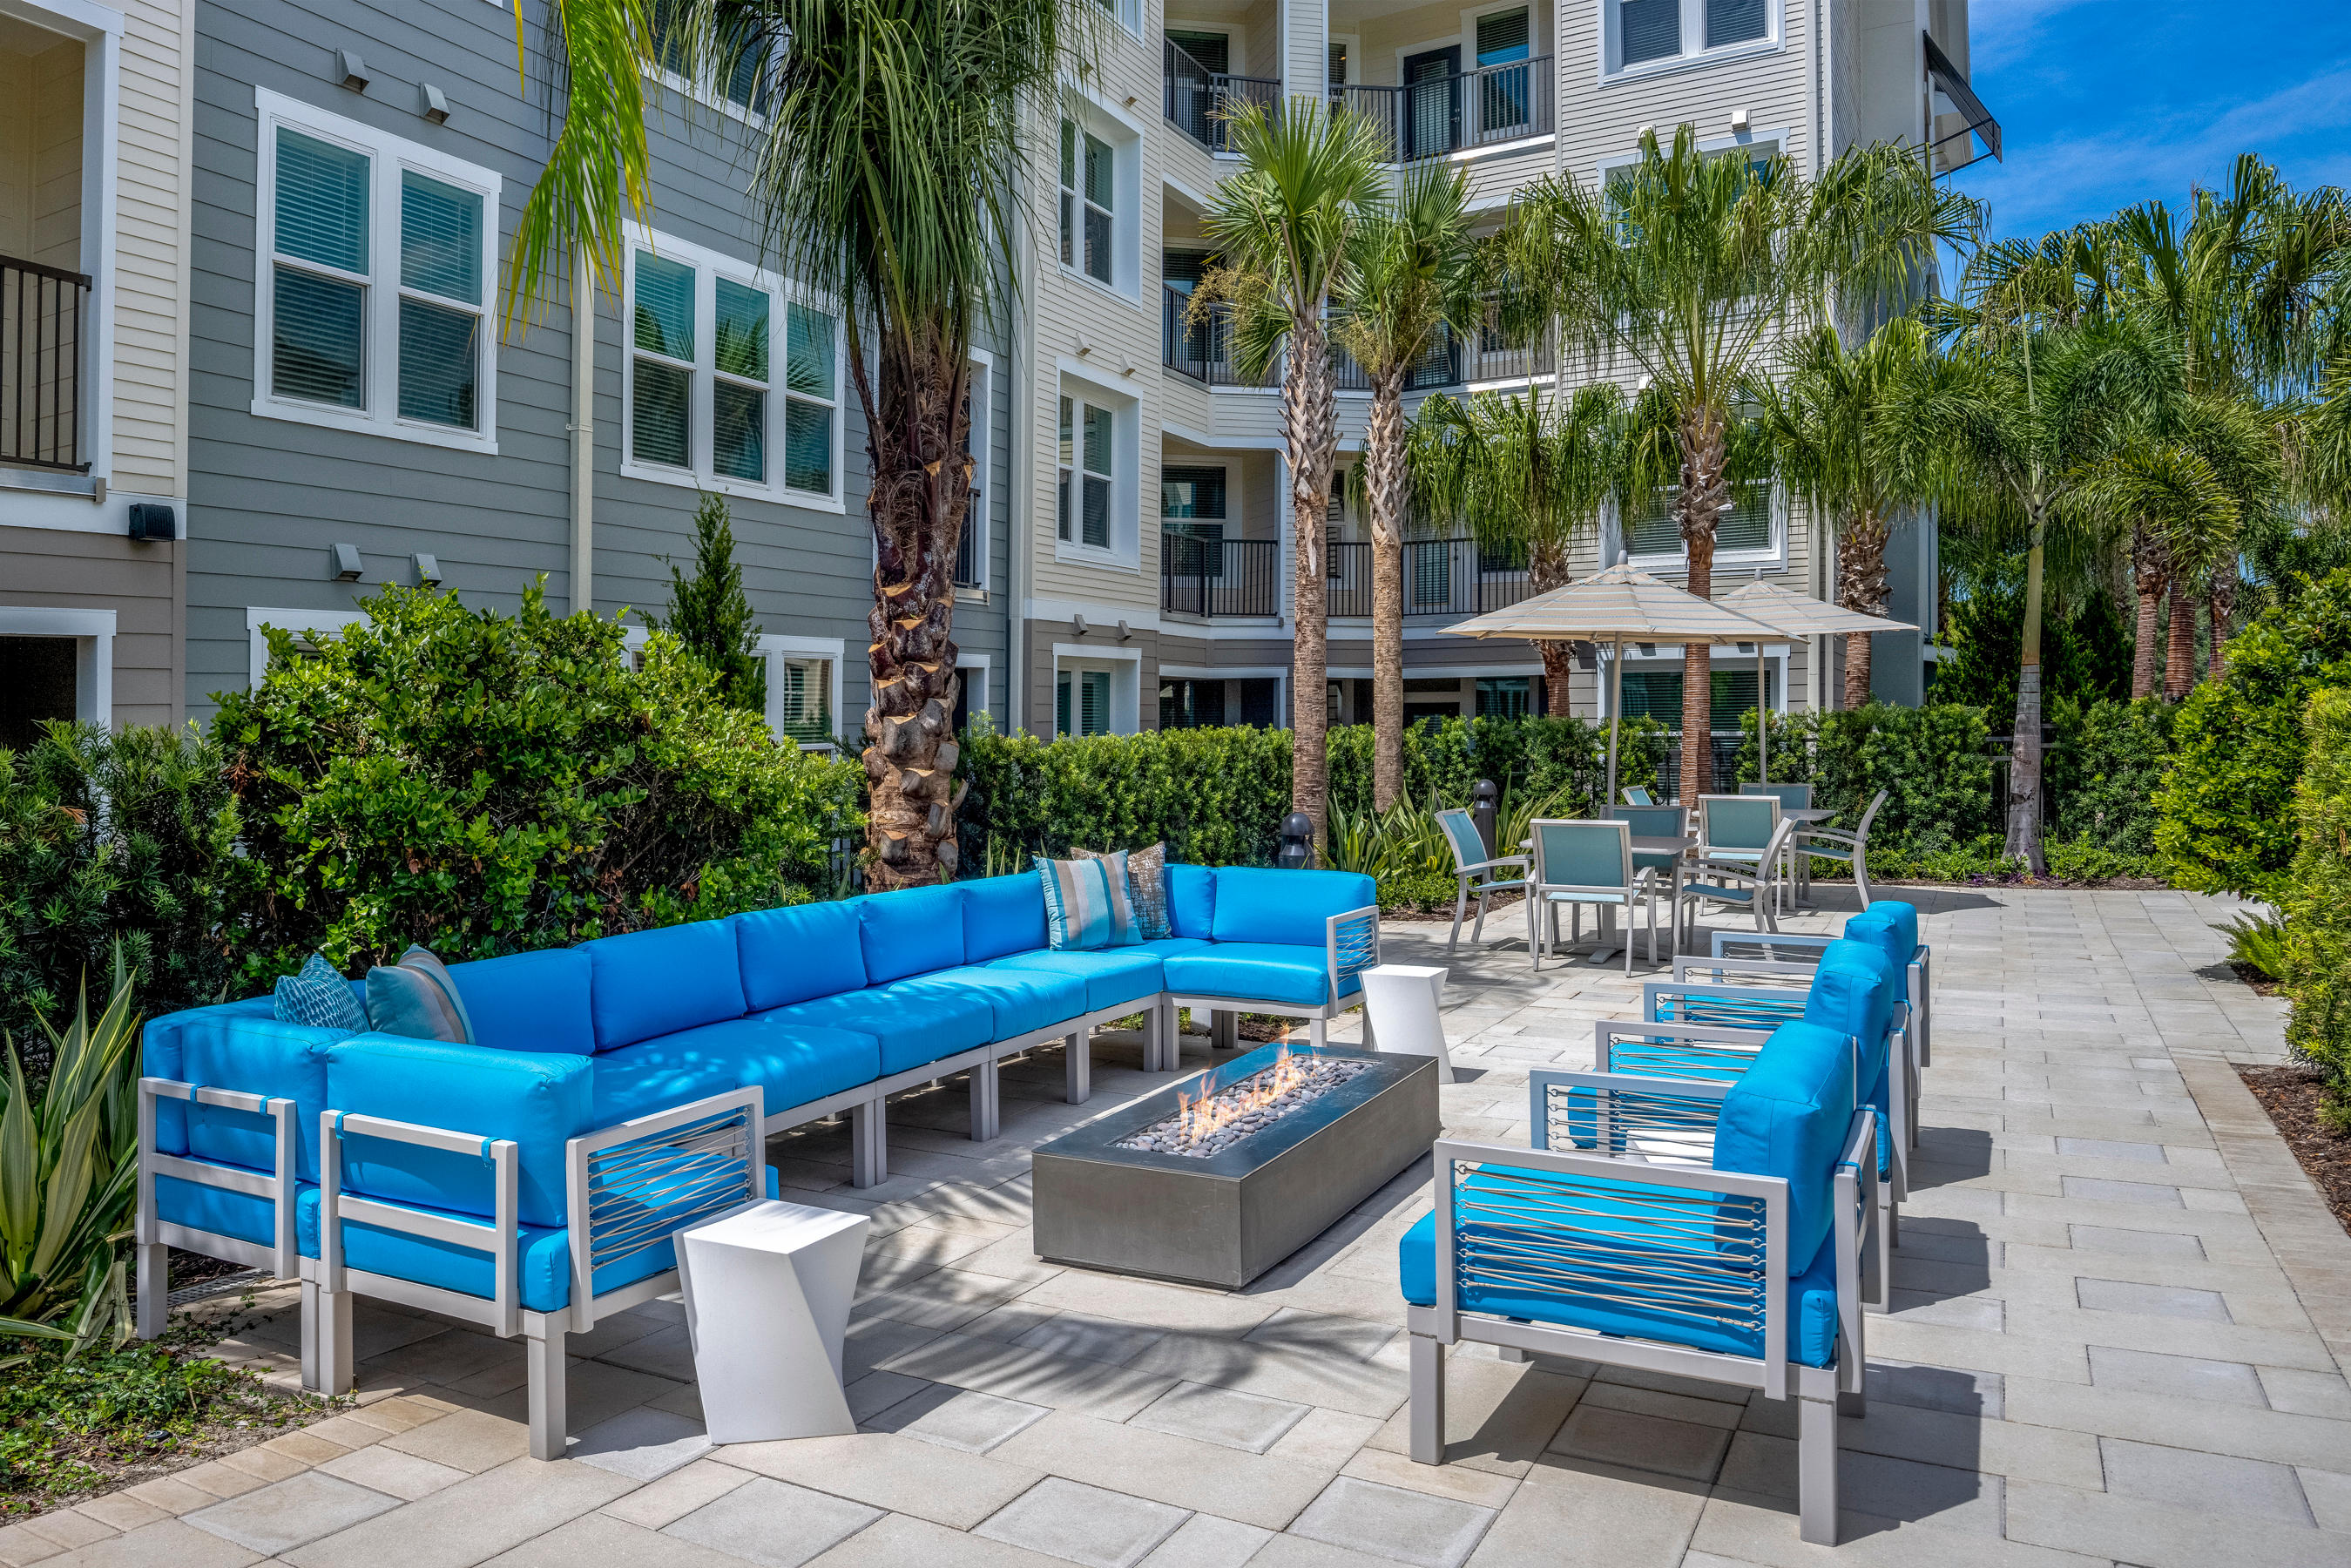 Outdoor Fireside Lounge at Waverly Terrace luxury apartments in Temple Terrace, FL